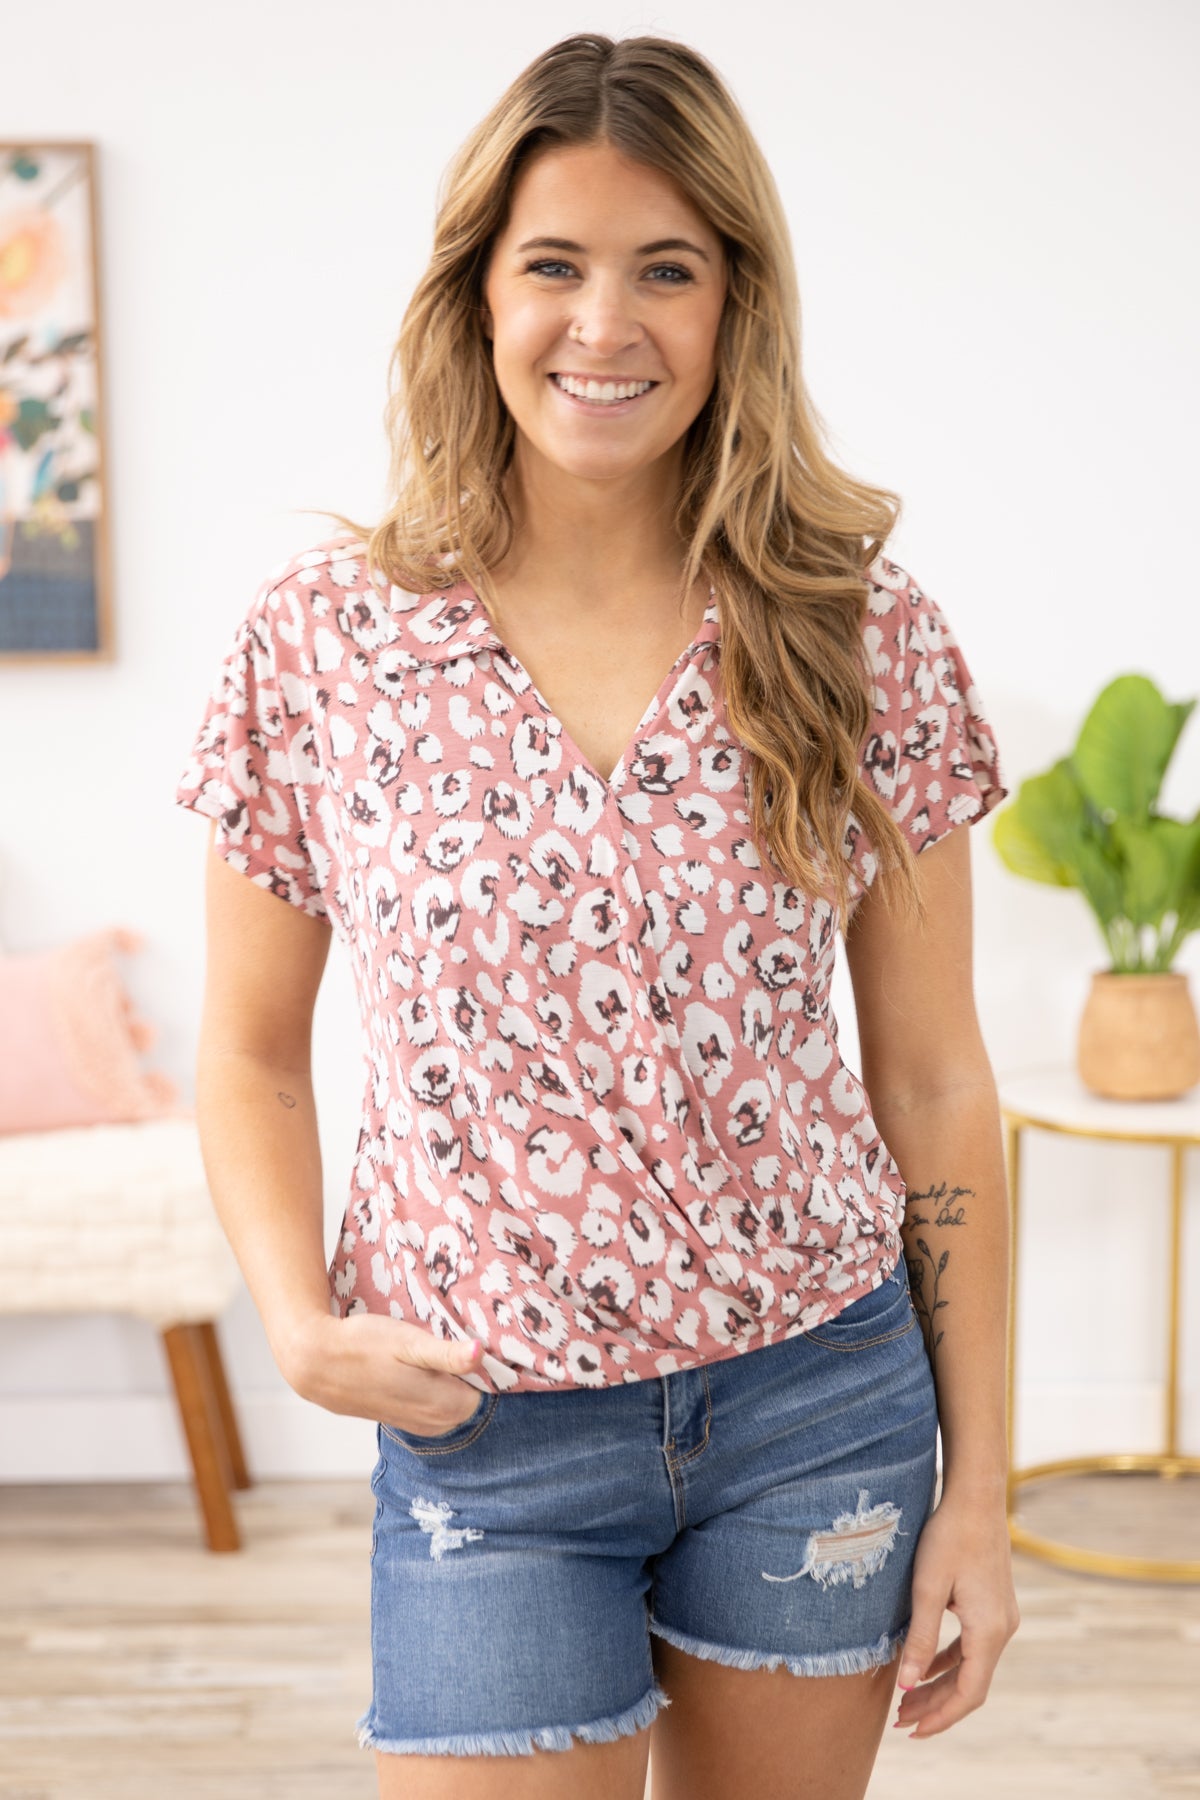 Dusty Rose and Ivory Animal Print Top - Filly Flair